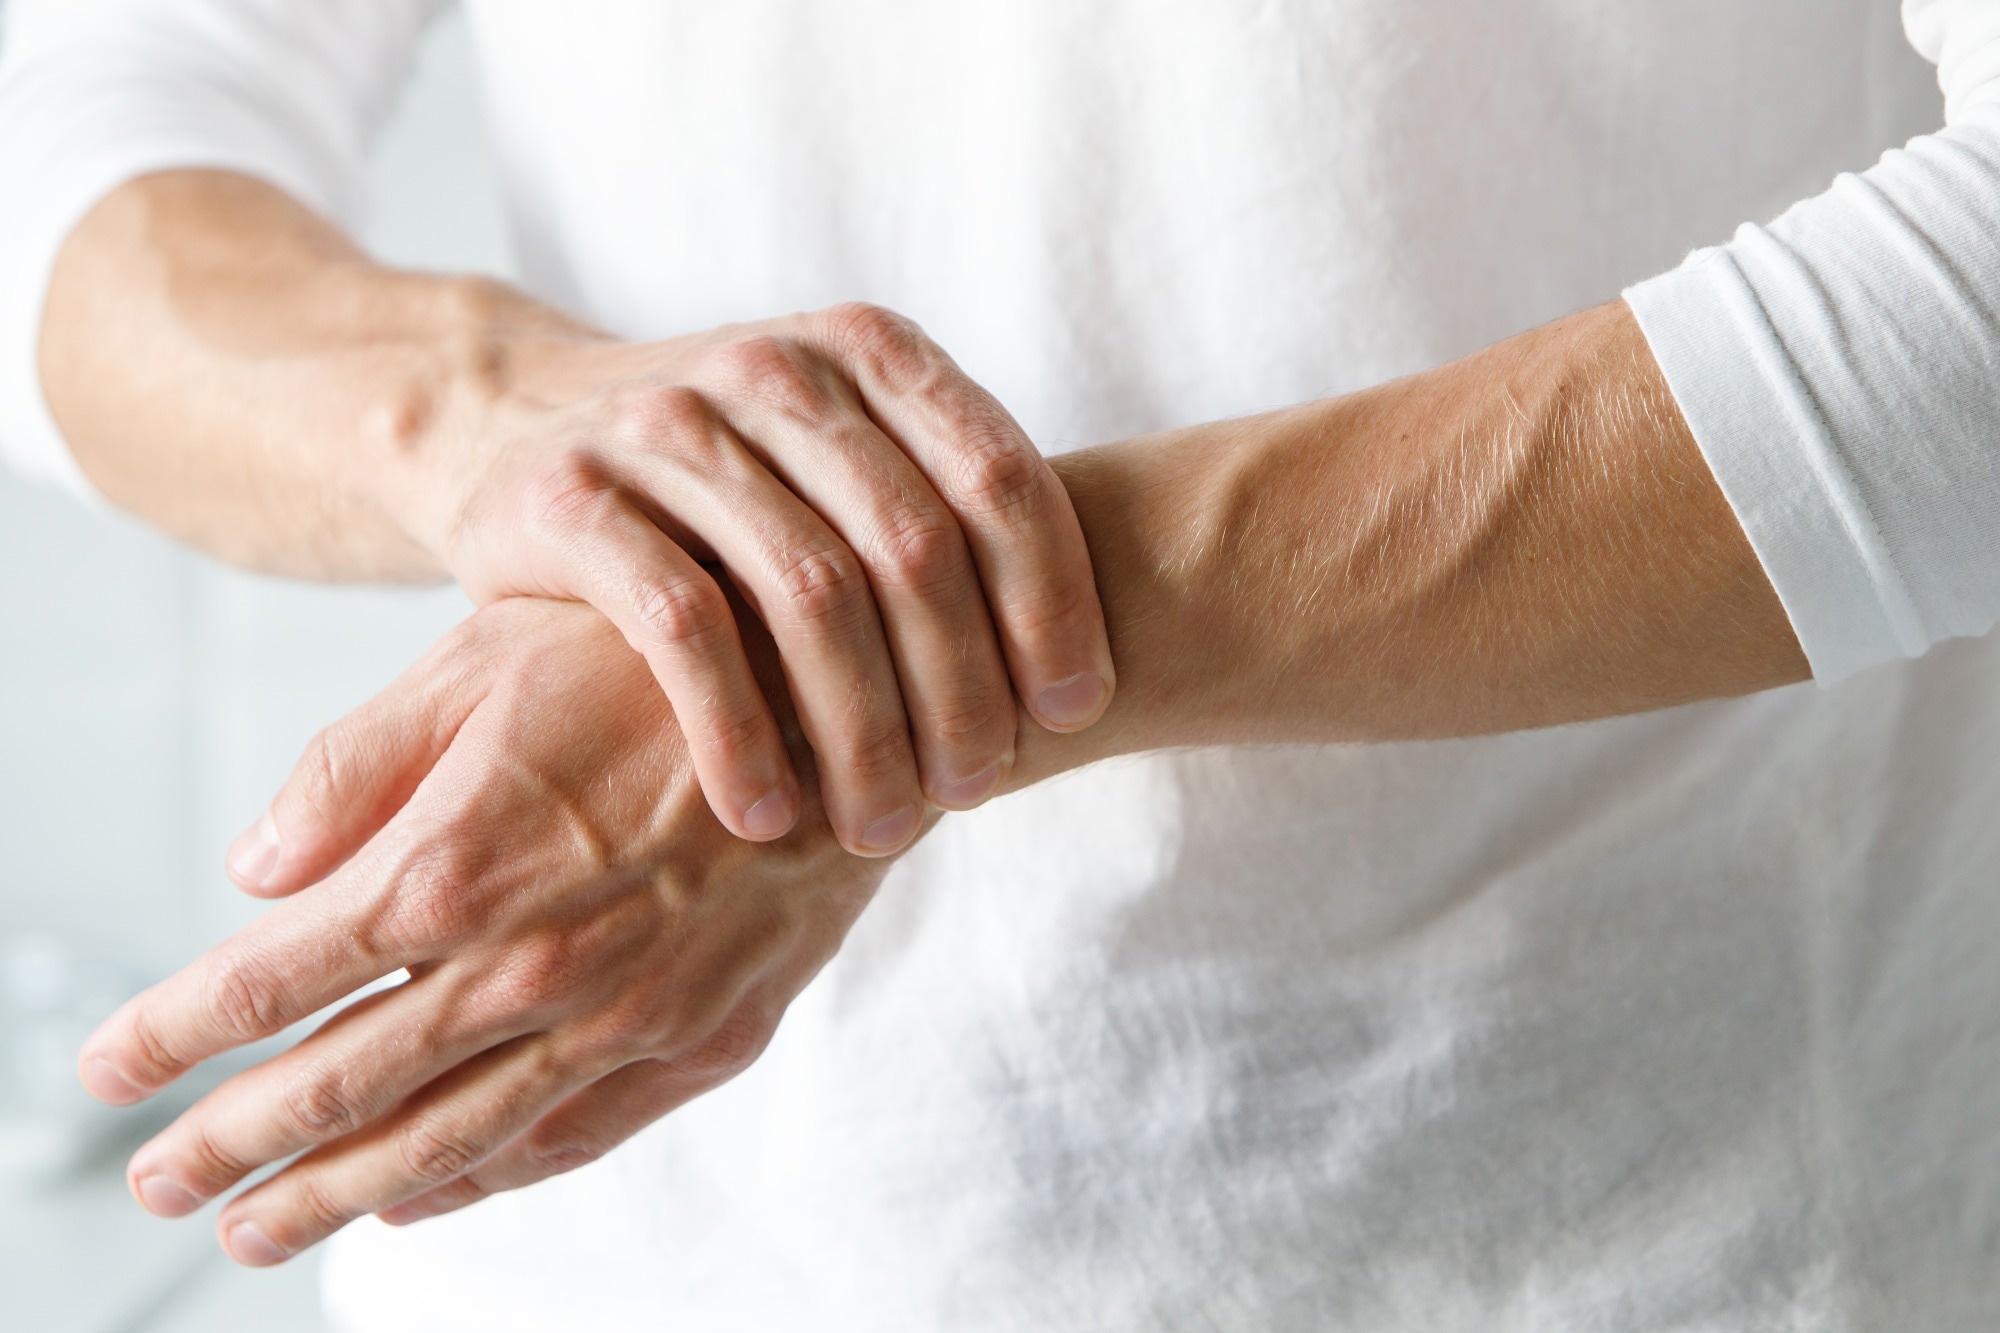 Study: Diminished responses to mRNA-based SARS-CoV-2 vaccines in individuals with rheumatoid arthritis on immune modifying therapies. Image Credit: DimaBerlin/Shutterstock